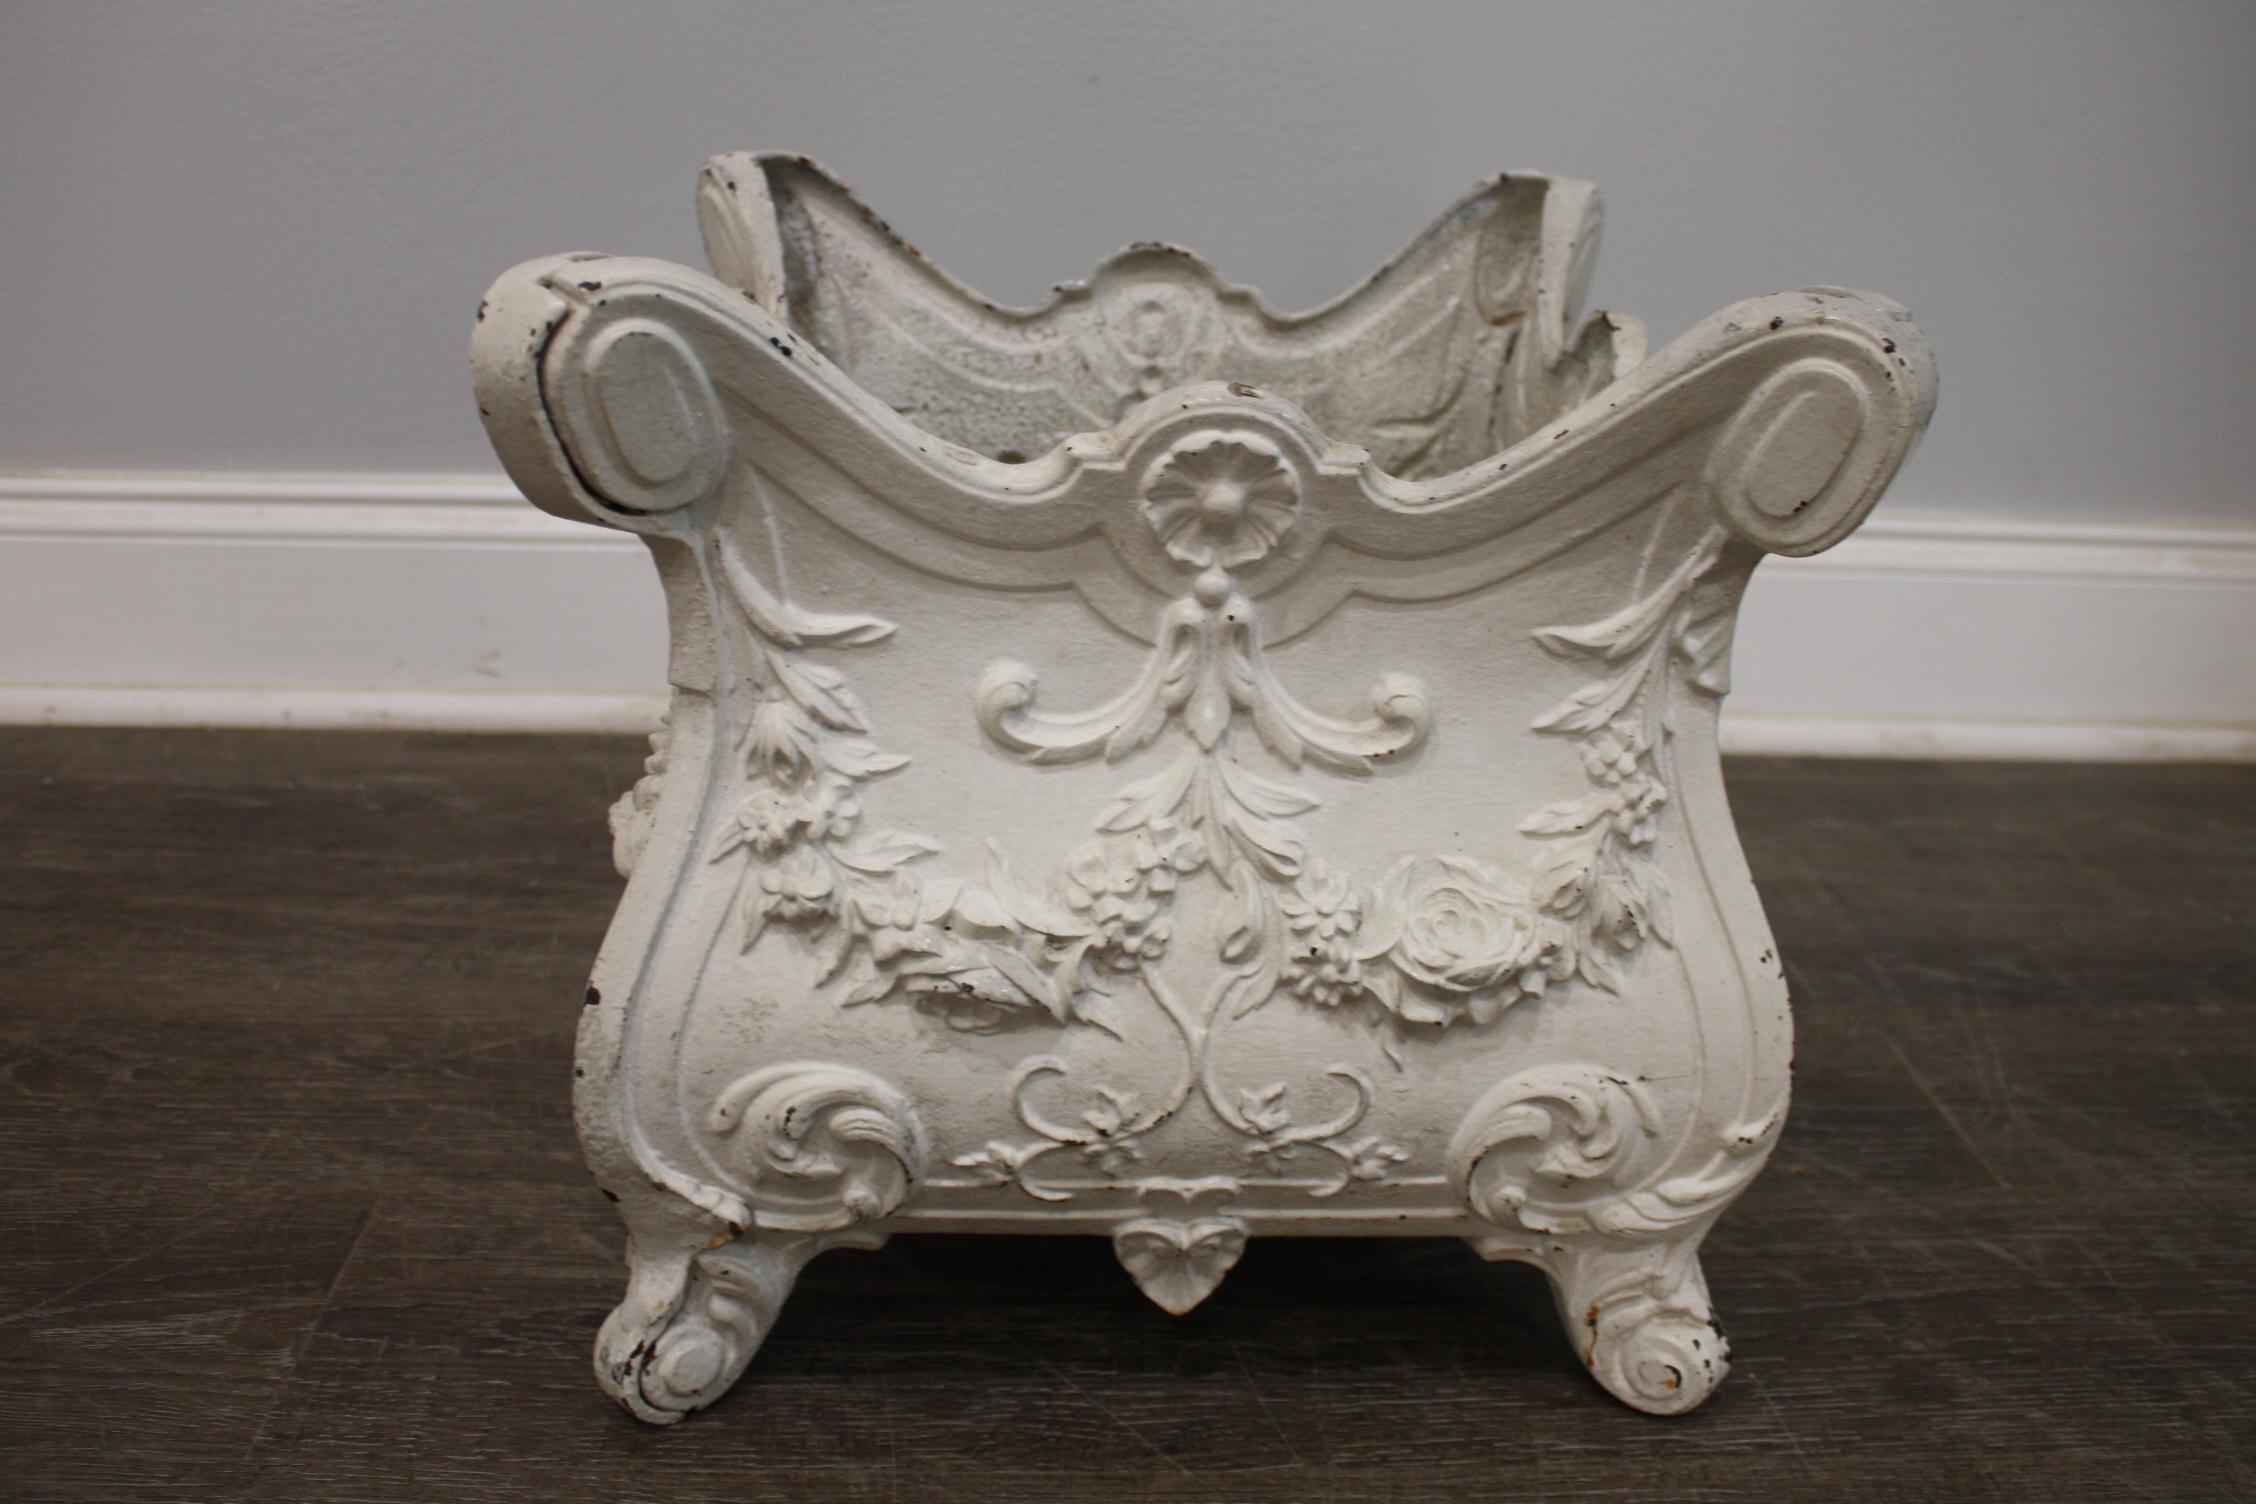 Charming iron Planter lacquered white/cream with garlands and flowers.